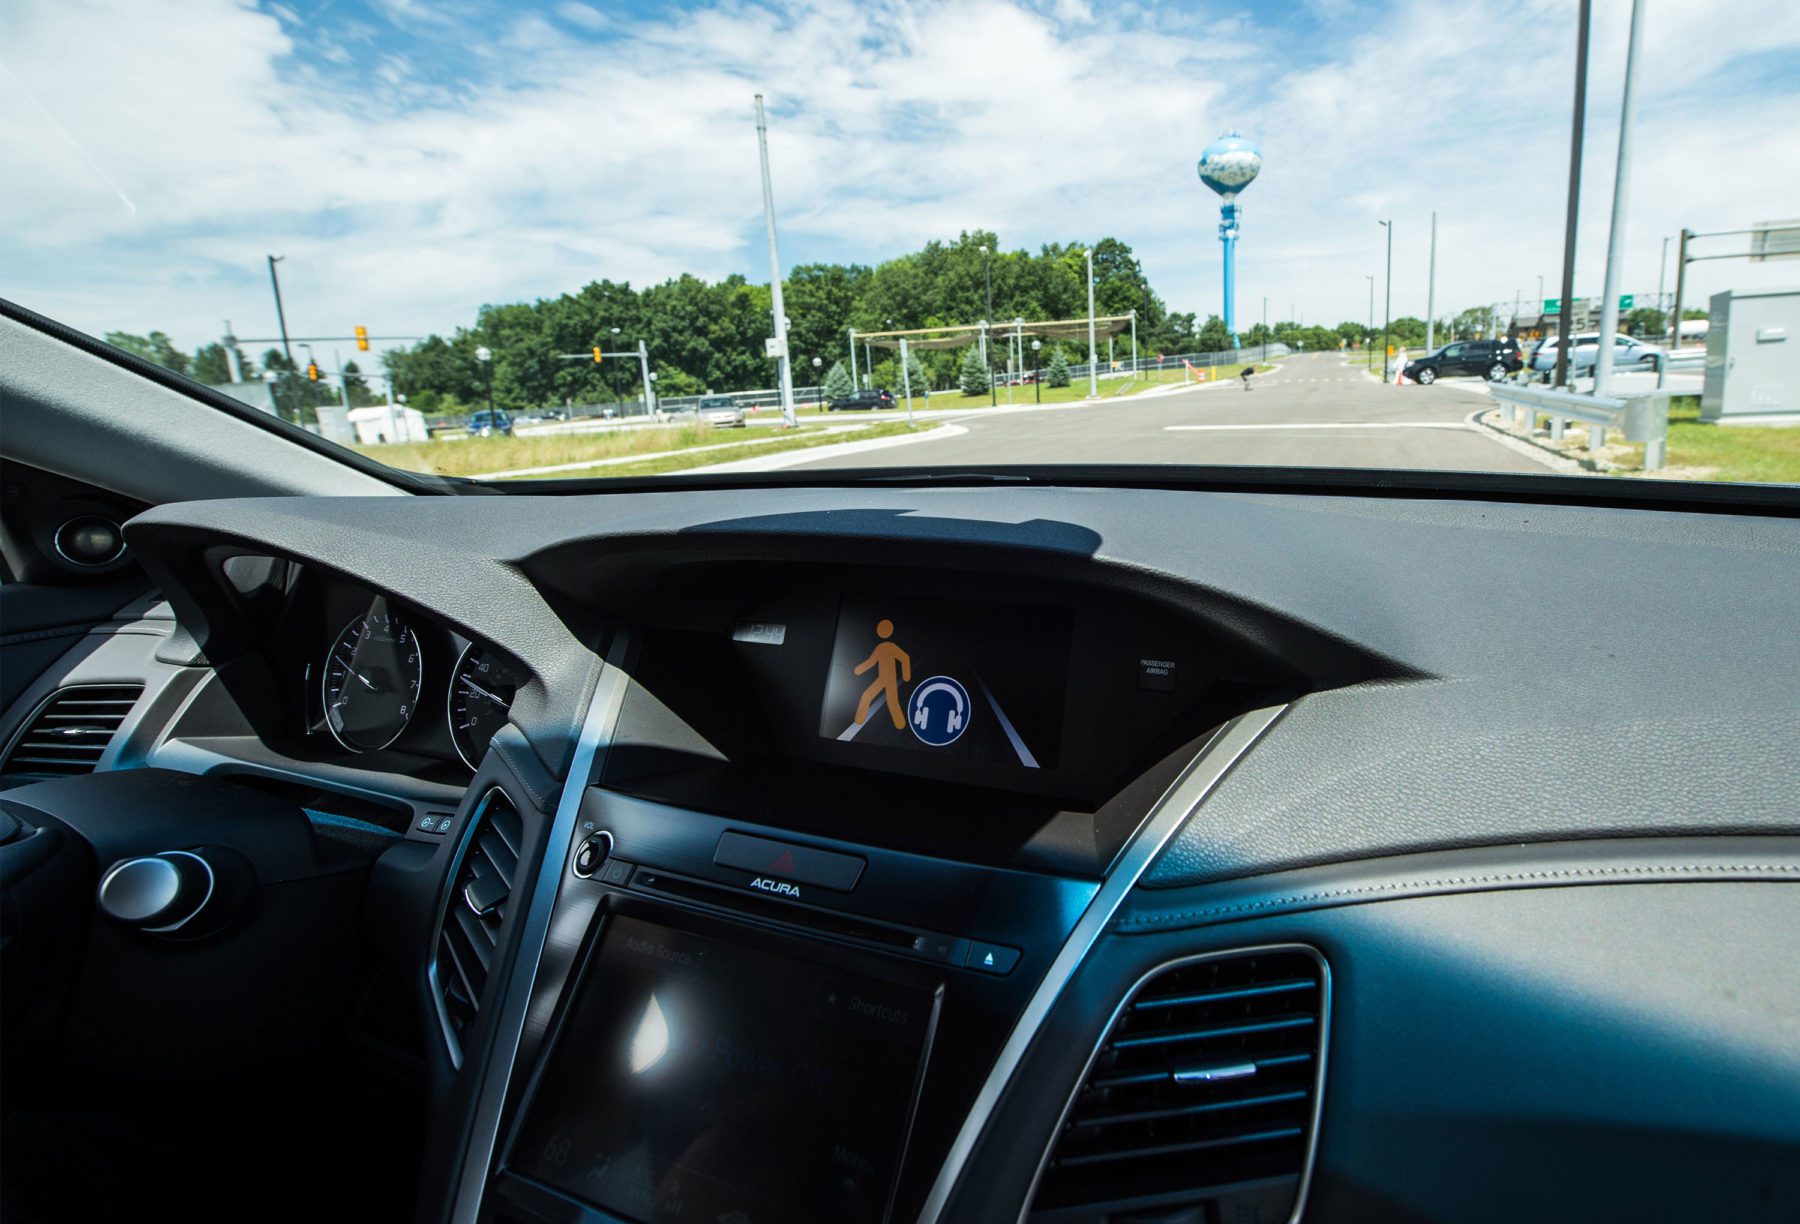 Dashboard of self-driving vehicle at M city test facility